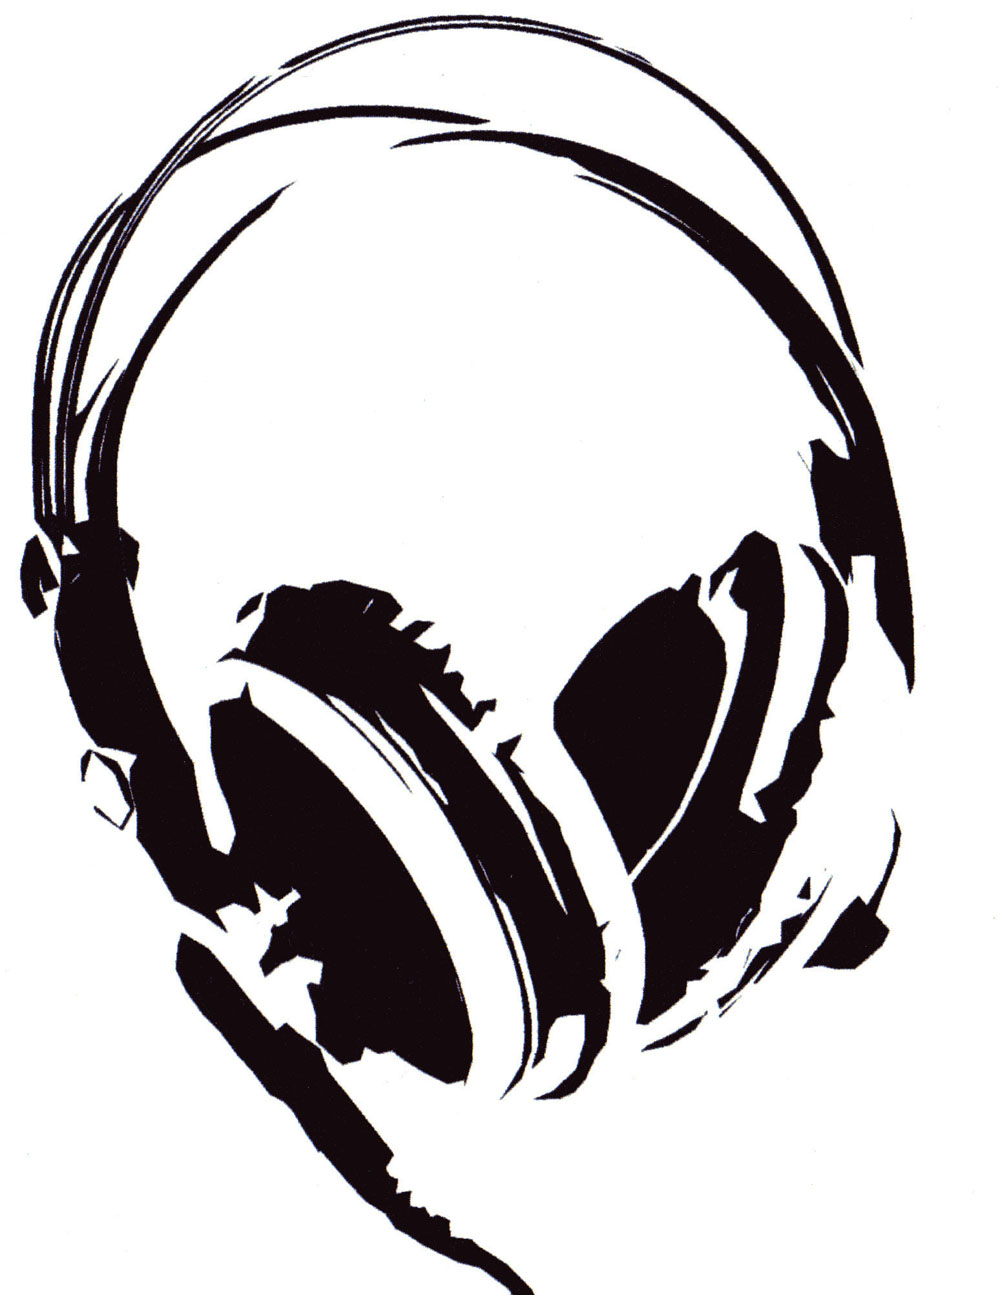 People With Headphones Drawing - ClipArt Best